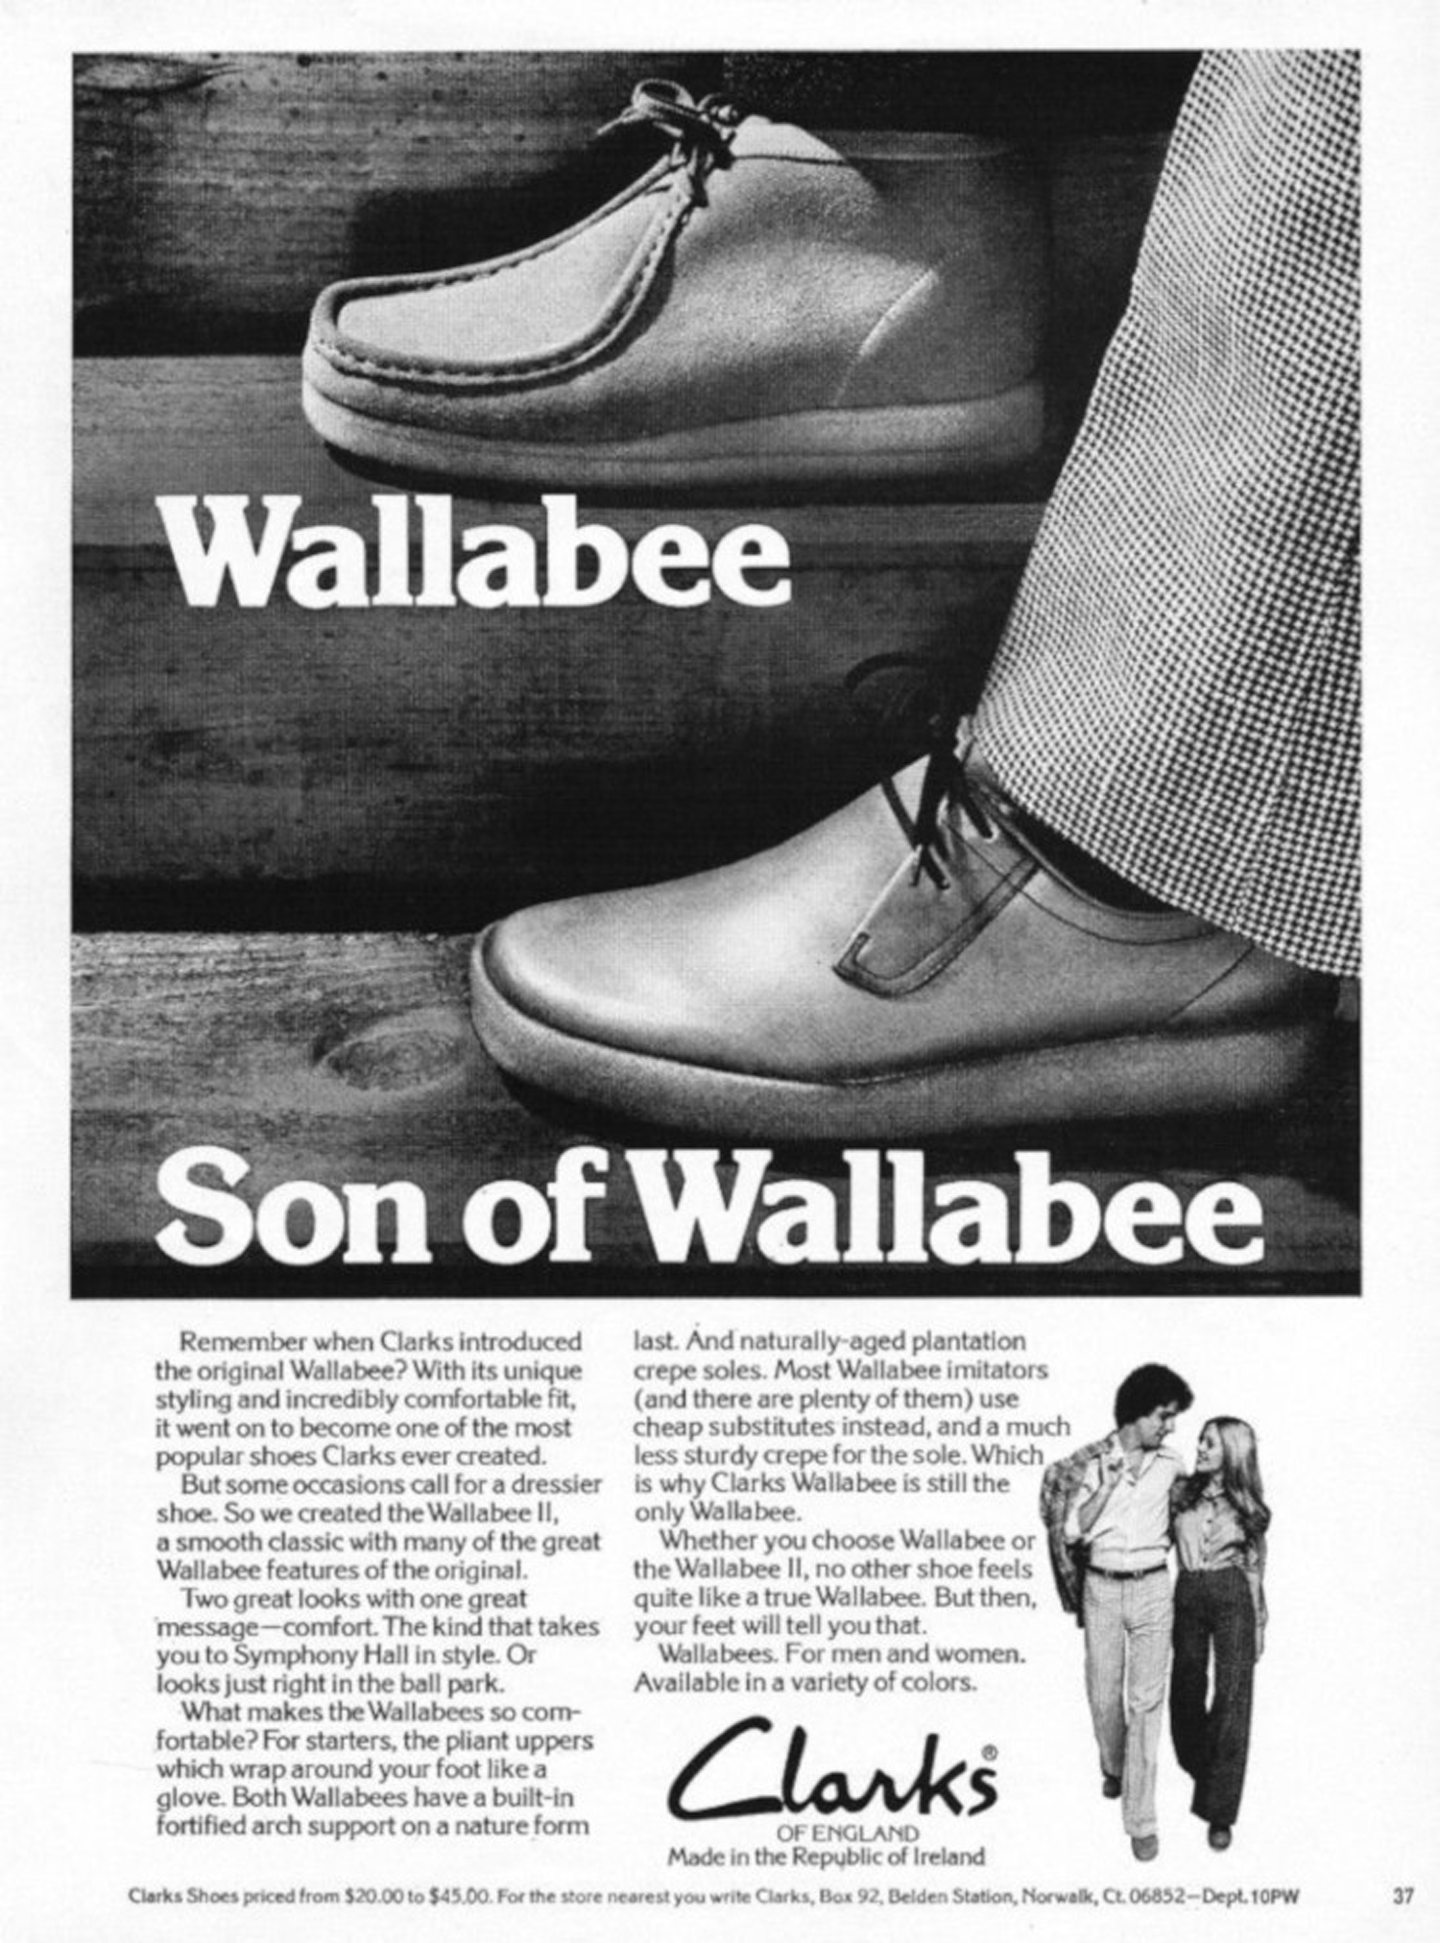 A Clarks advert showing two pairs of Wallabee shoes